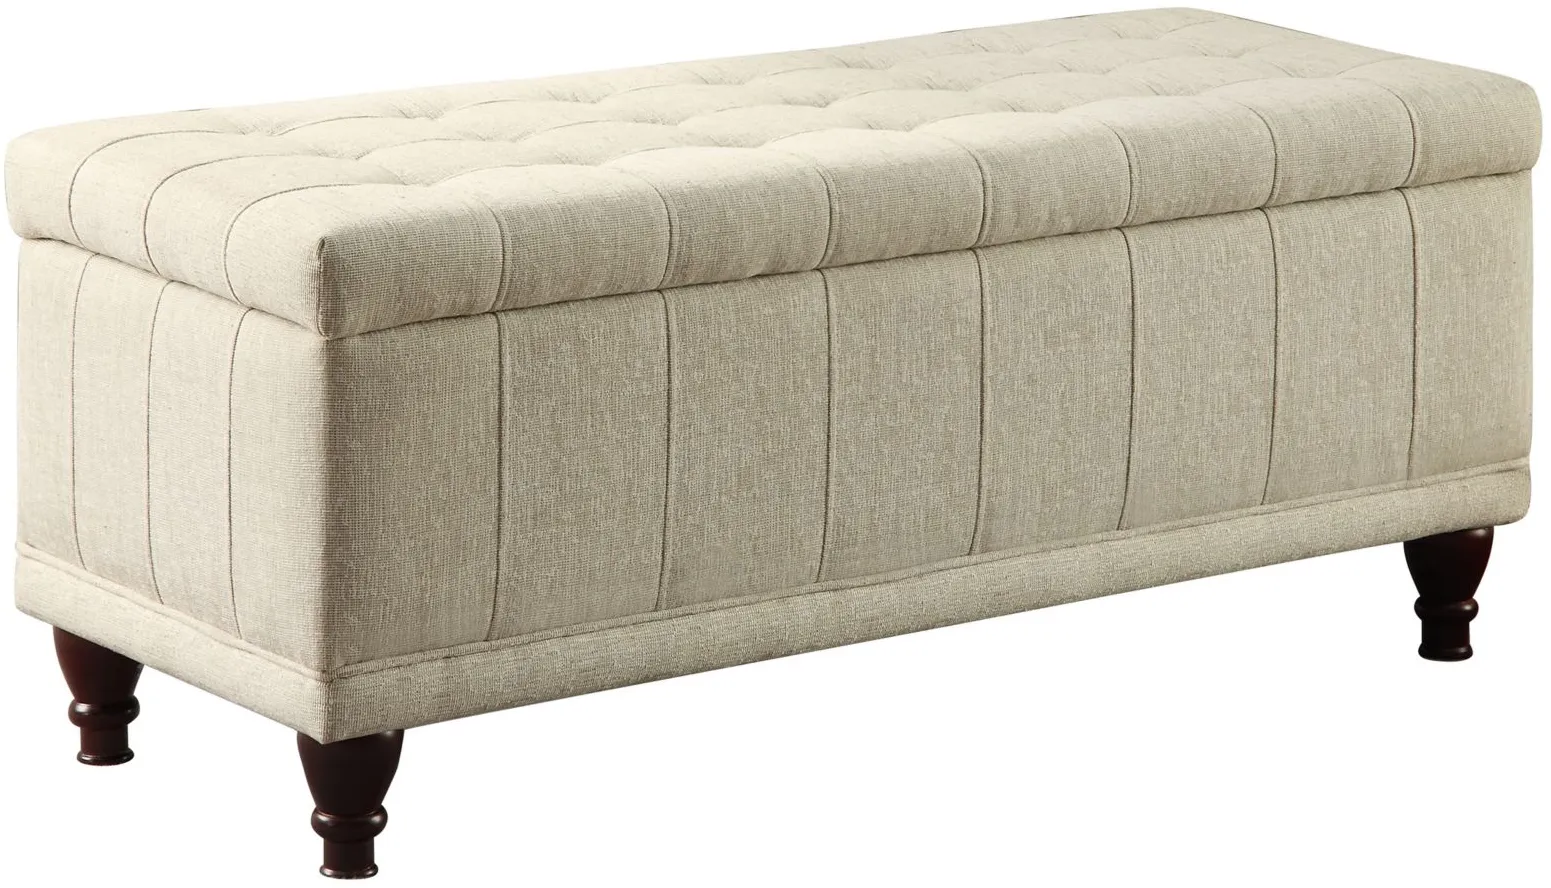 Ferris Lift-Top Storage Bench in Linen by Homelegance